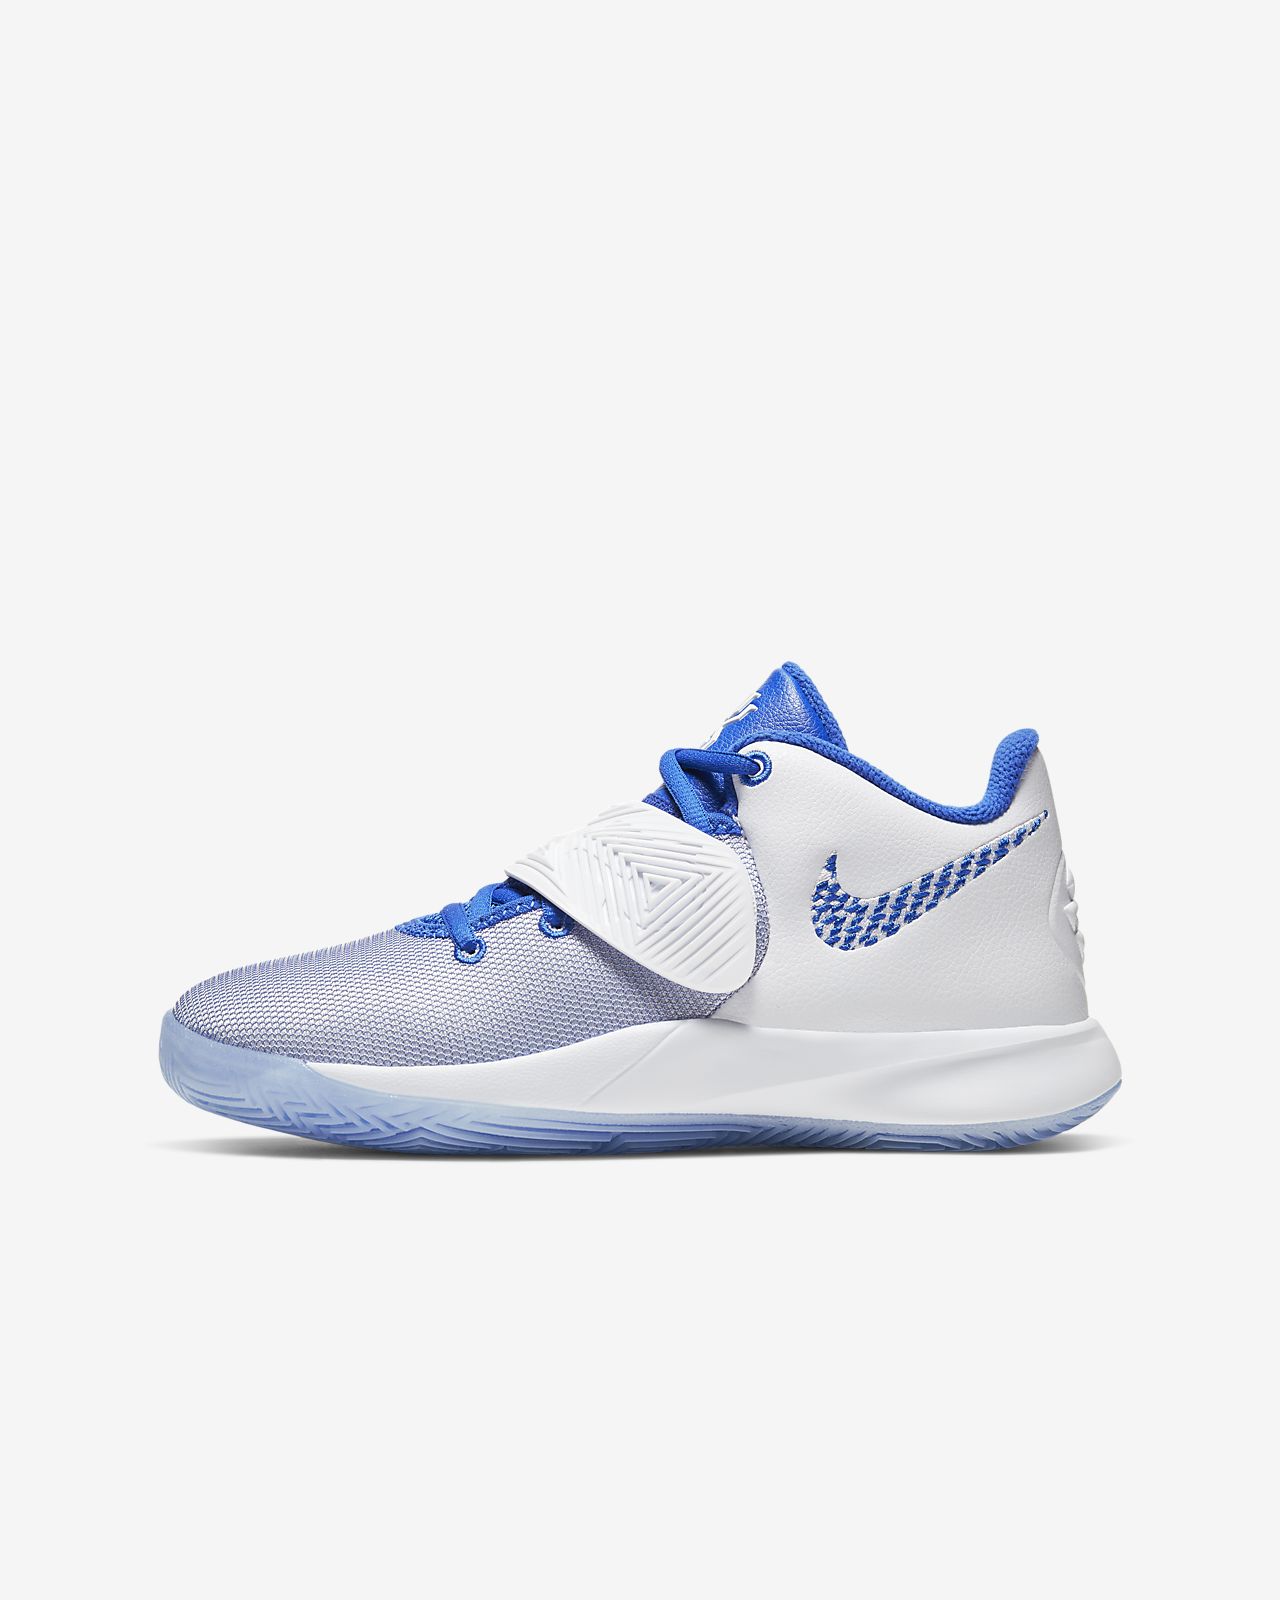 kyrie flytrap 3 blue and white